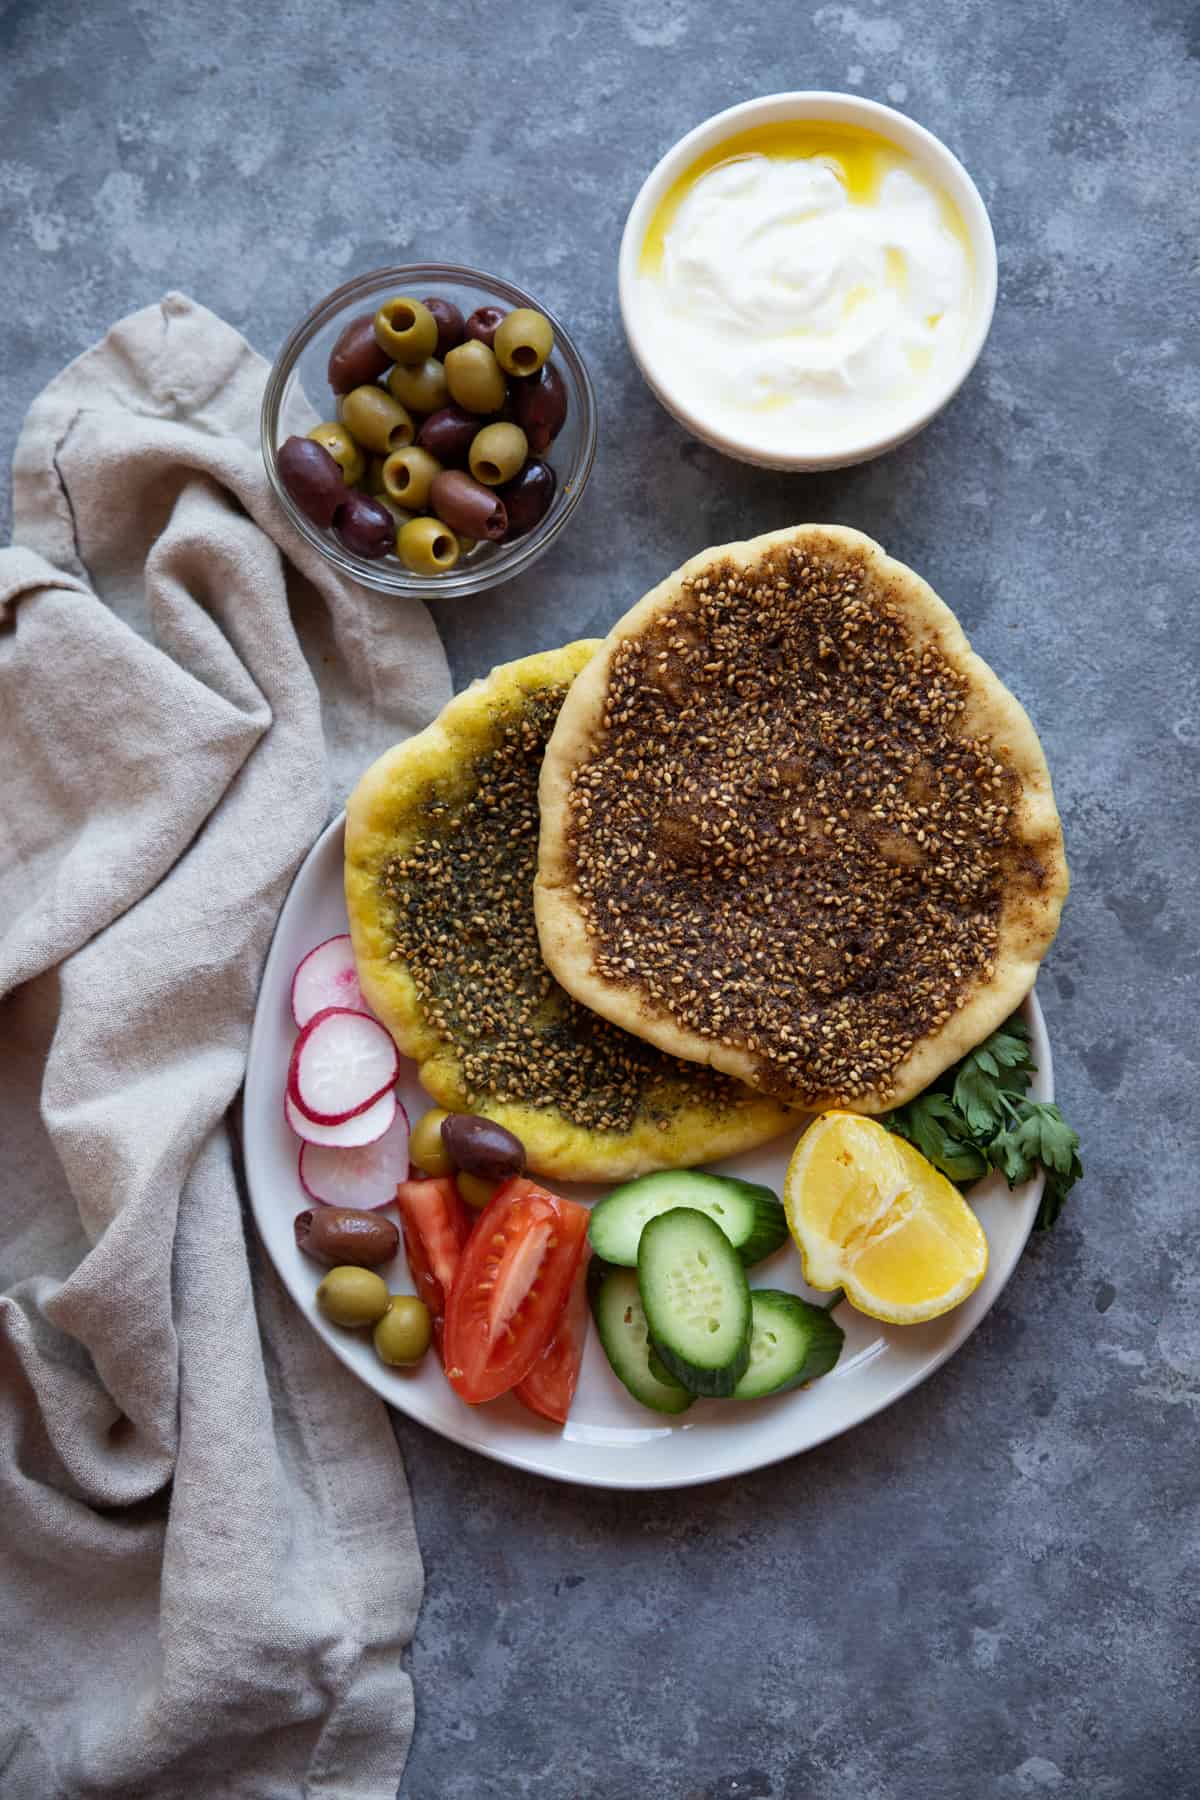 2 manakish zaatar on a plate with vegetables on a grey background. 